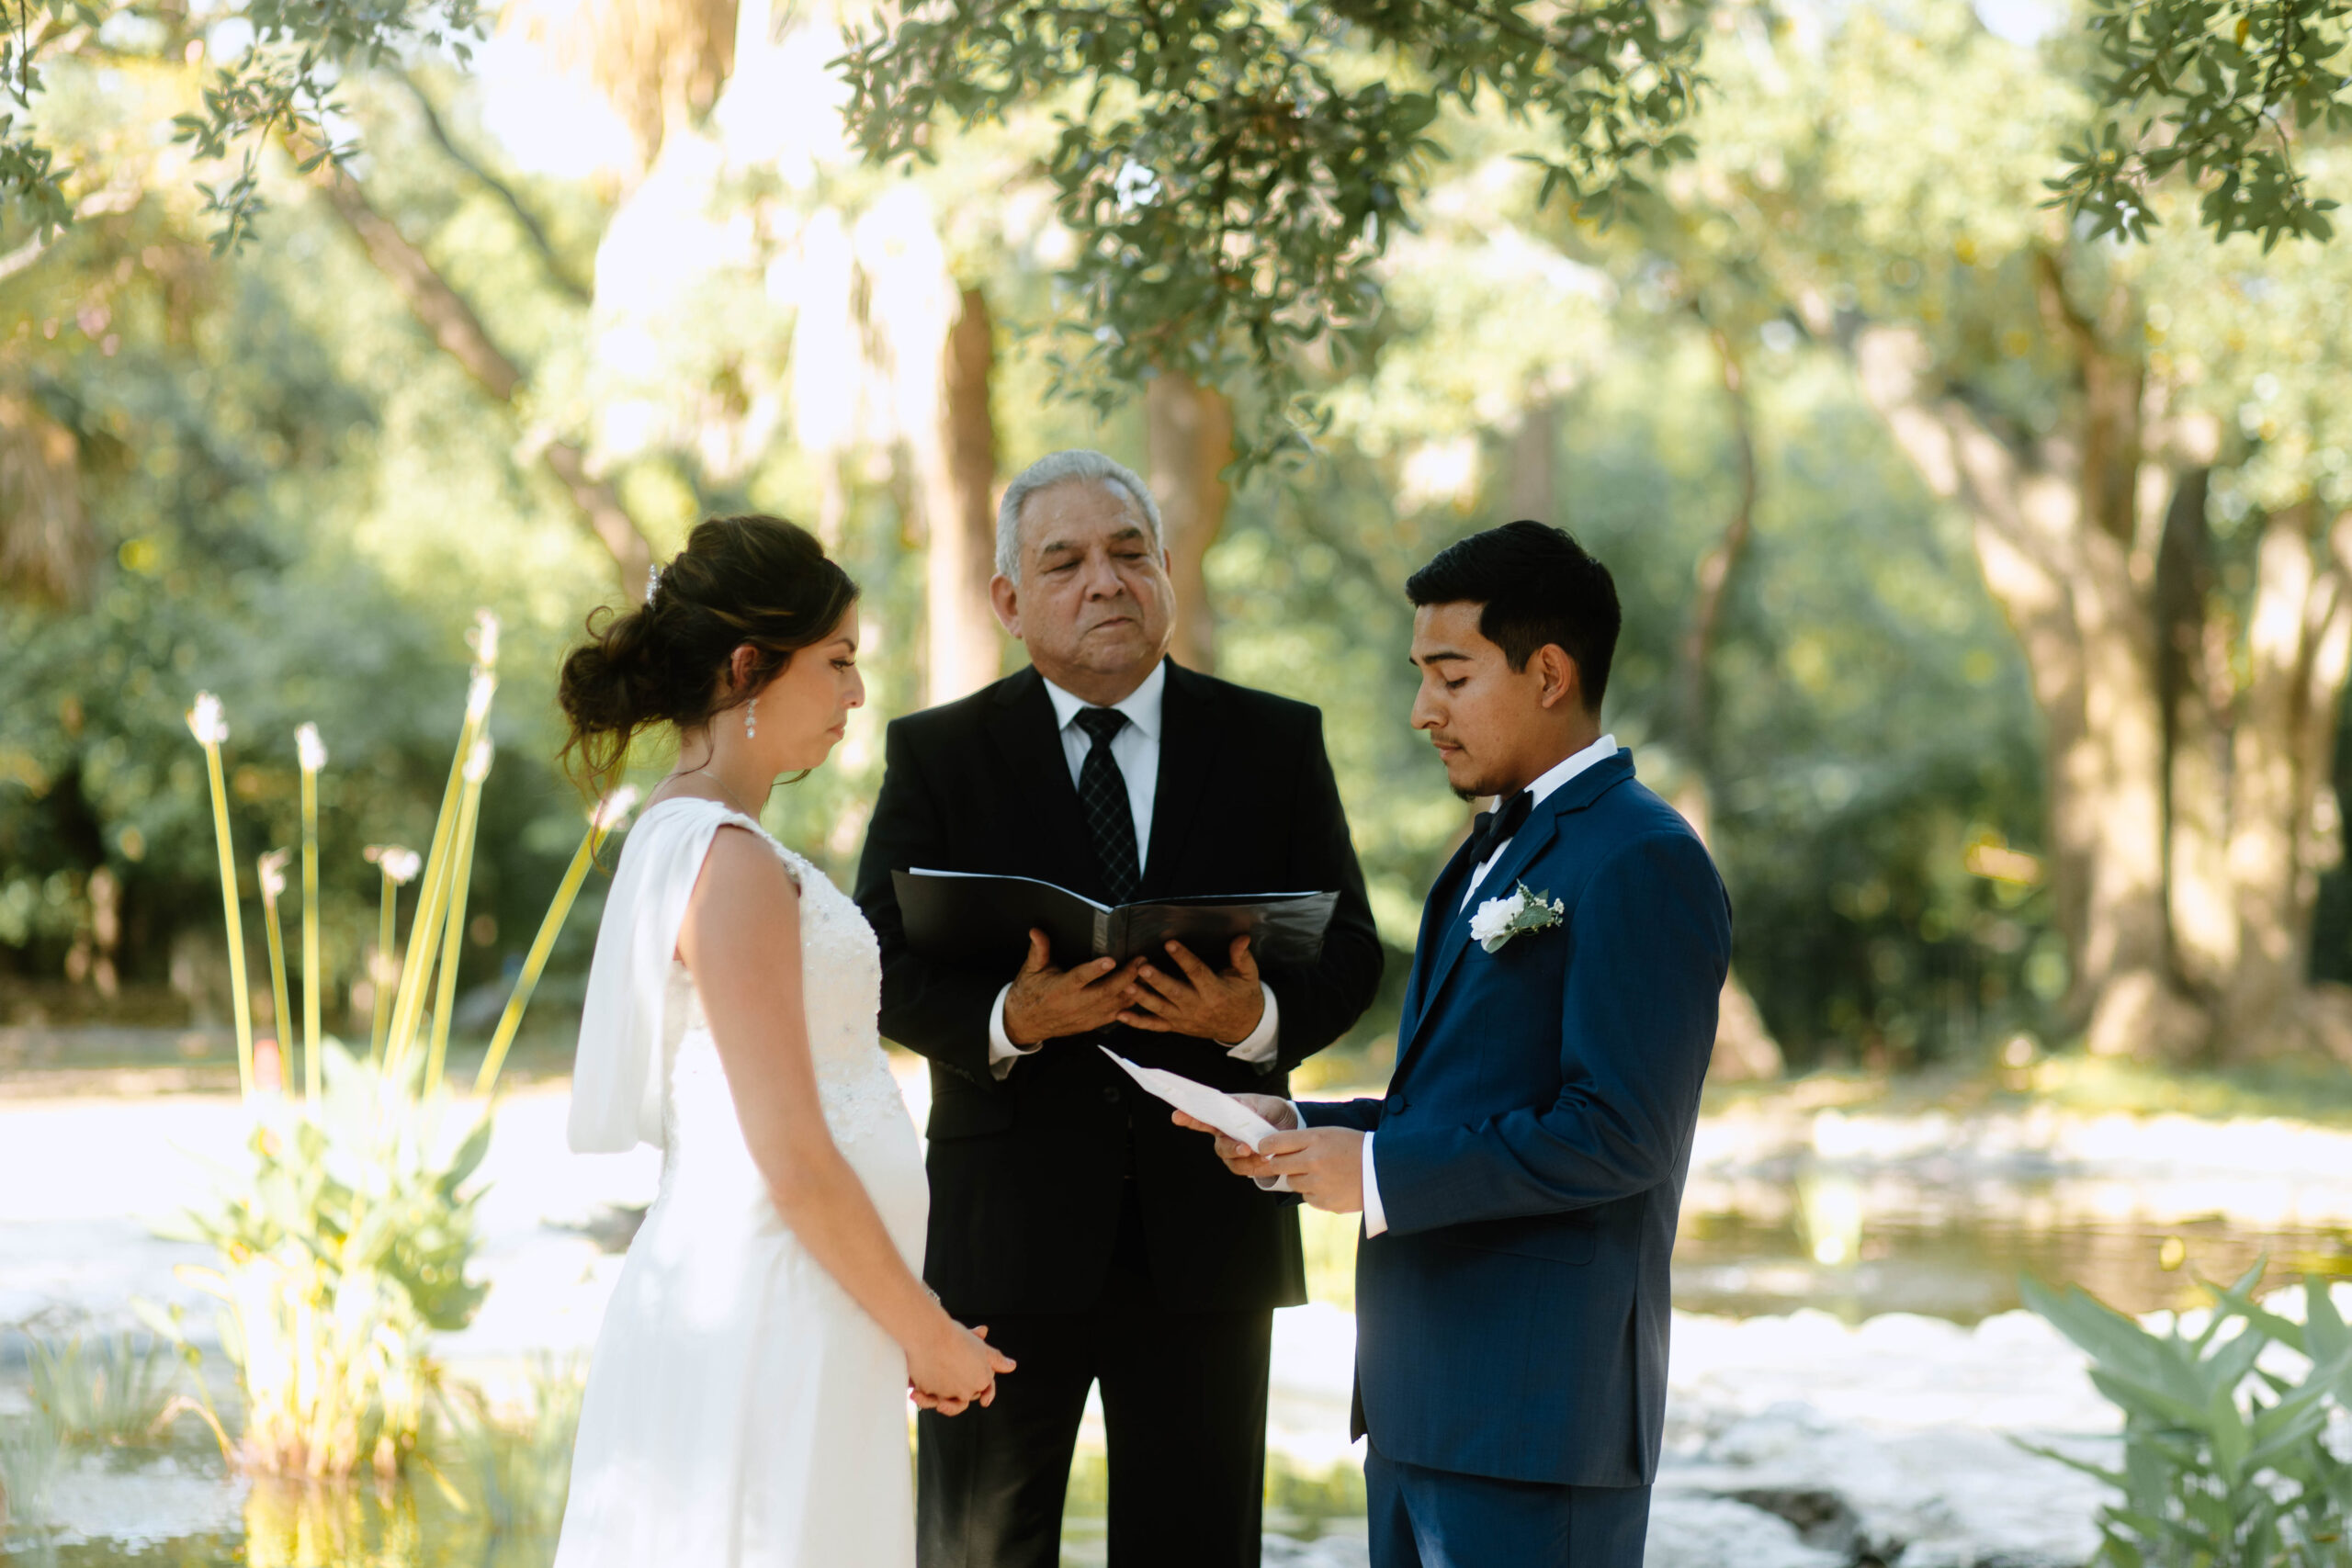 A couple eloping at Mayfield Park in Austin Texas. The two in the photo are Ana and Abel, a couple who hosted their summer wedding at Mayfield Cottage and Gardens.